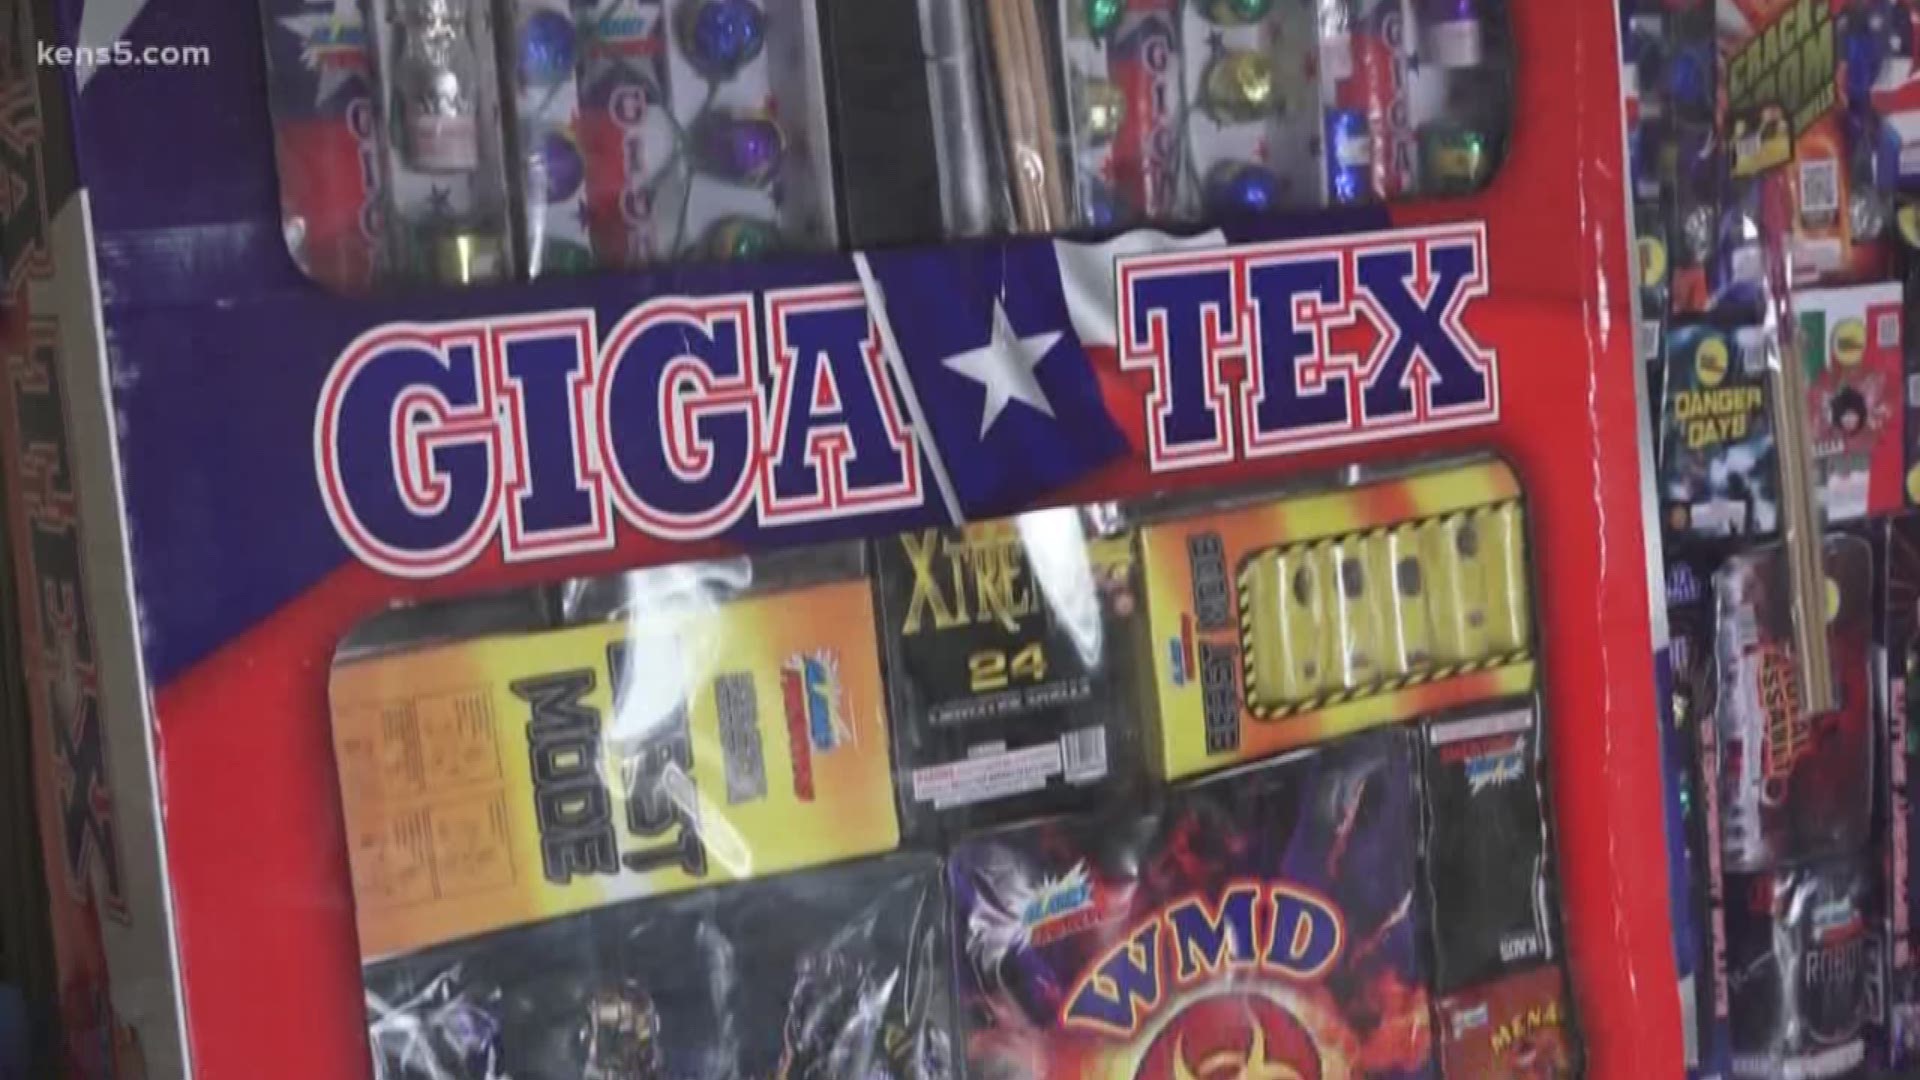 KENS 5 headed to a local fireworks stand to find out how much dough South Texans are shelling out for putting on a nighttime show on Independence Day.